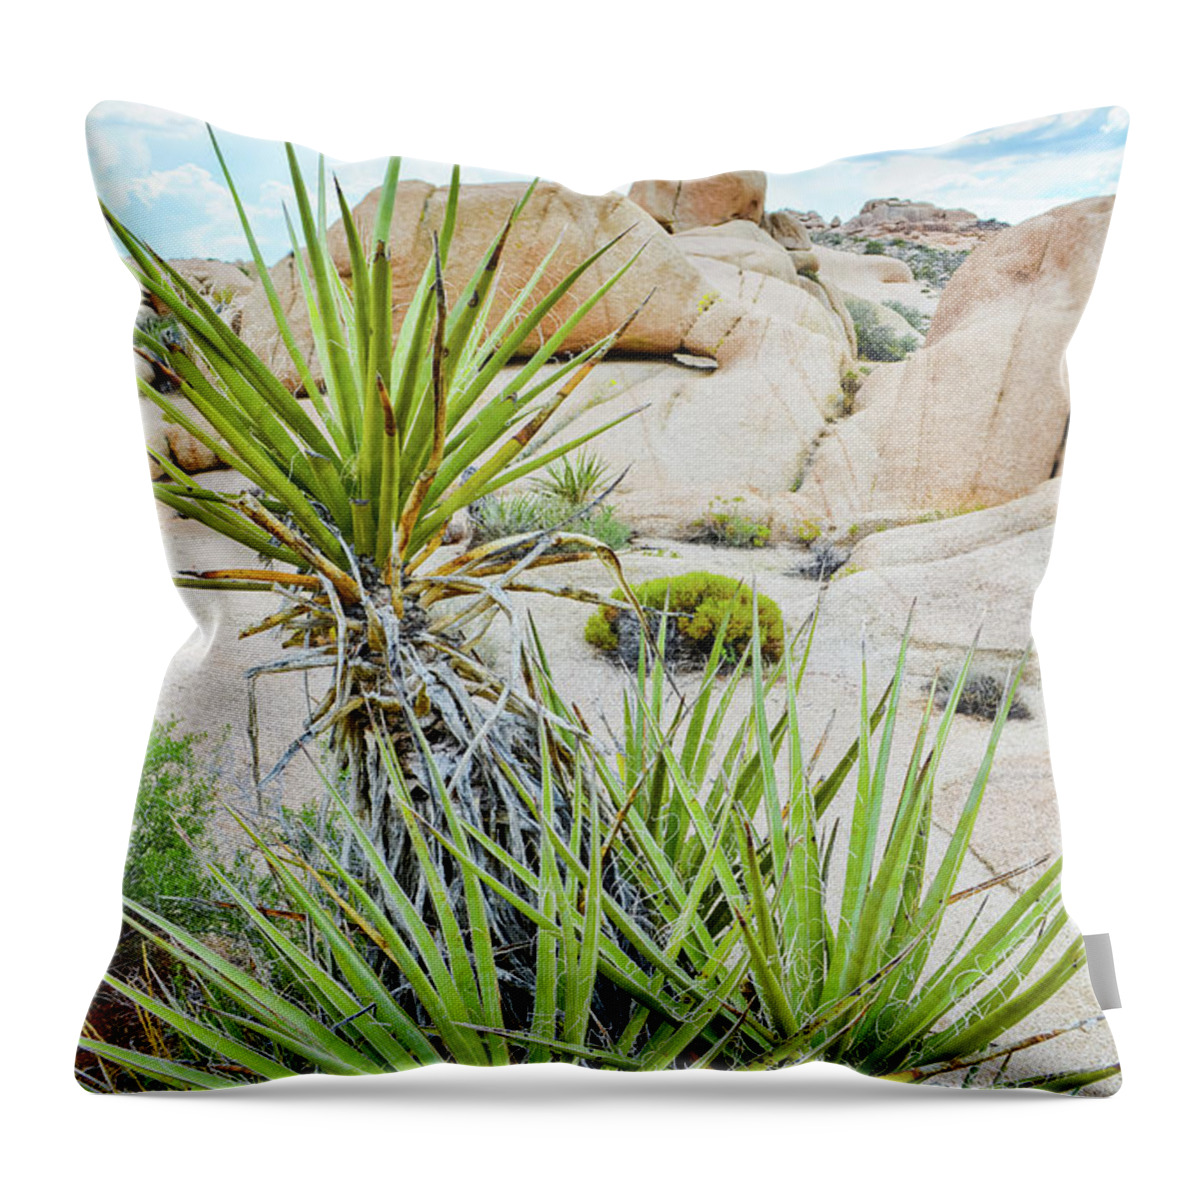 Joshua Tree Throw Pillow featuring the photograph Hidden Valley Yucca by Kyle Hanson